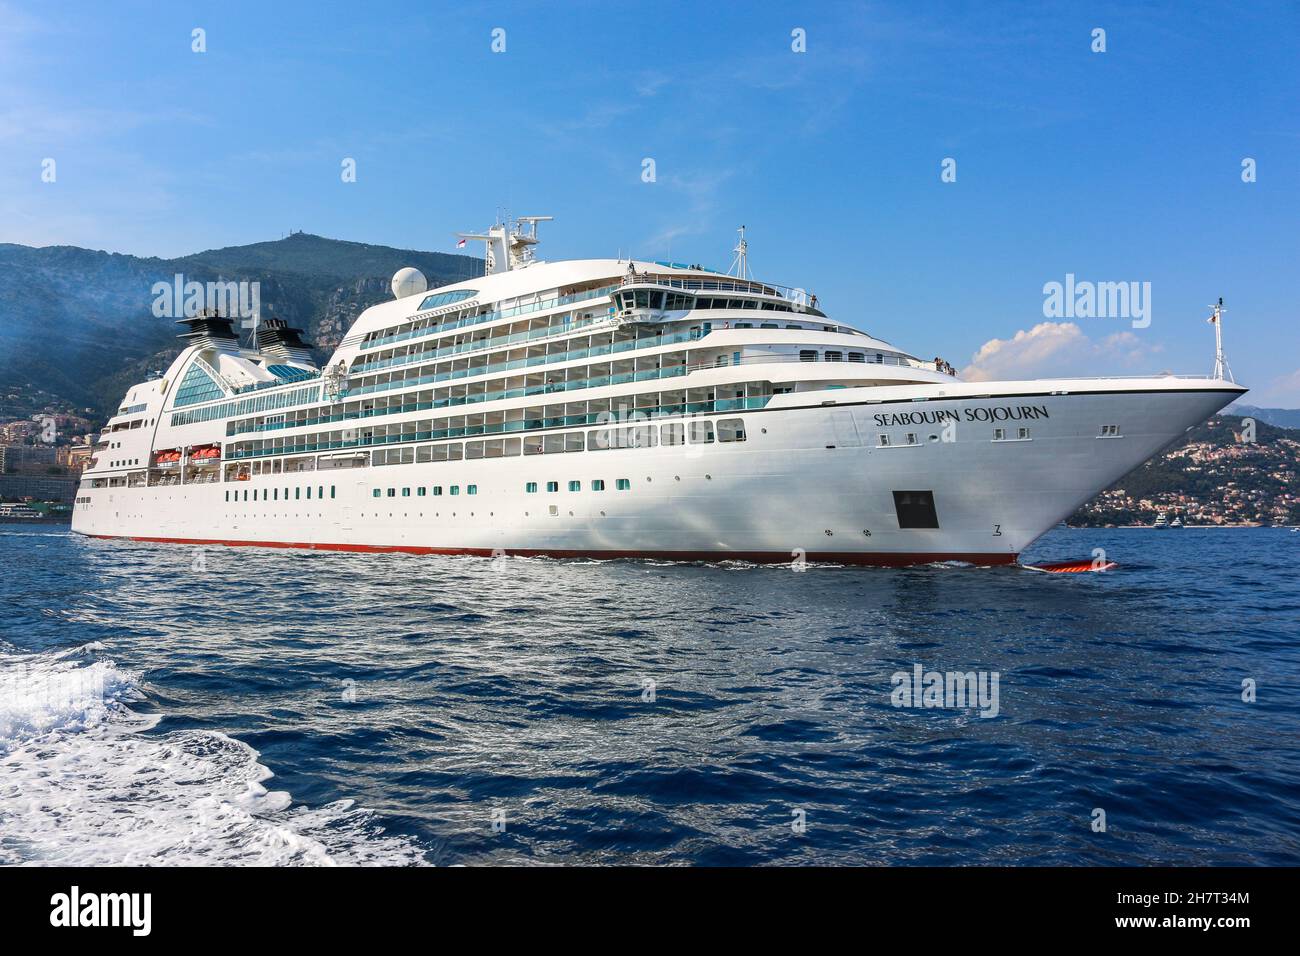 Seabourn Sojourn, luxury cruise ship operated by Seabourn Cruise Line. The vessel left port Hercule, Monaco Monte Carlo, Cruises tourism image photo Stock Photo